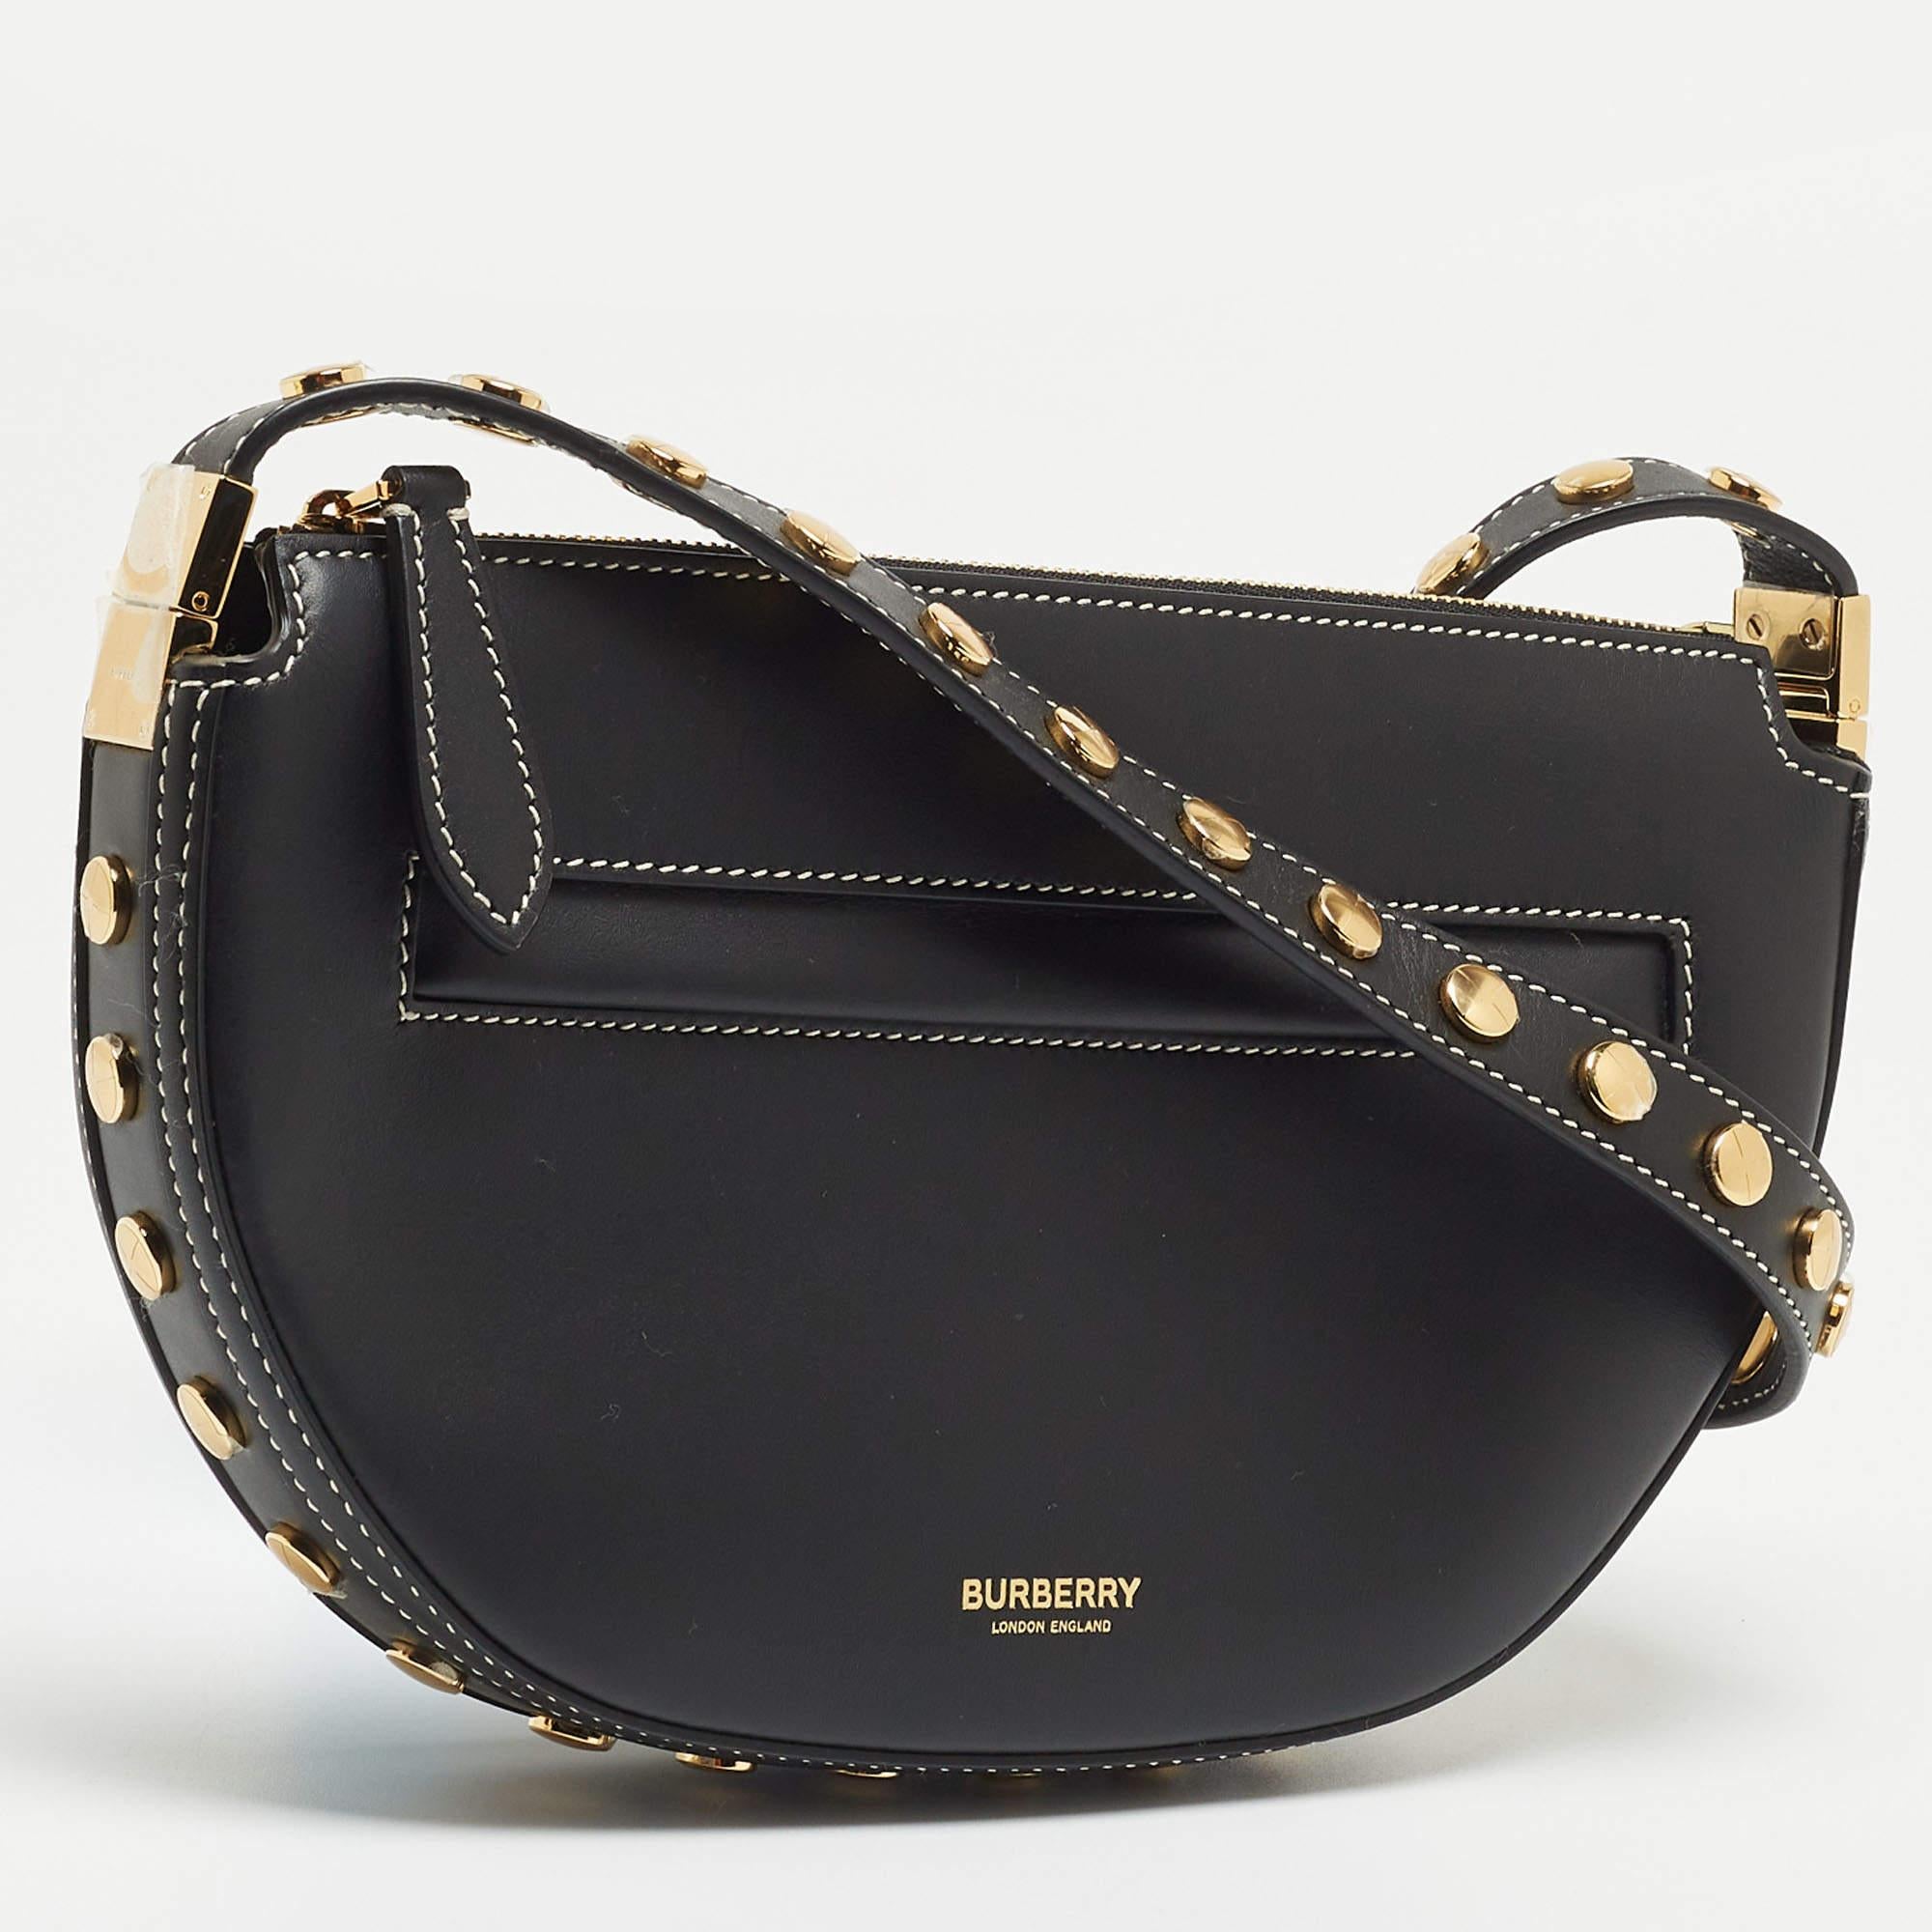 For a look that is complete with style, taste, and a touch of luxe, this shoulder bag is the perfect addition. Flaunt this beauty on your shoulder at any event and revel in the taste of luxury it leaves you with.

